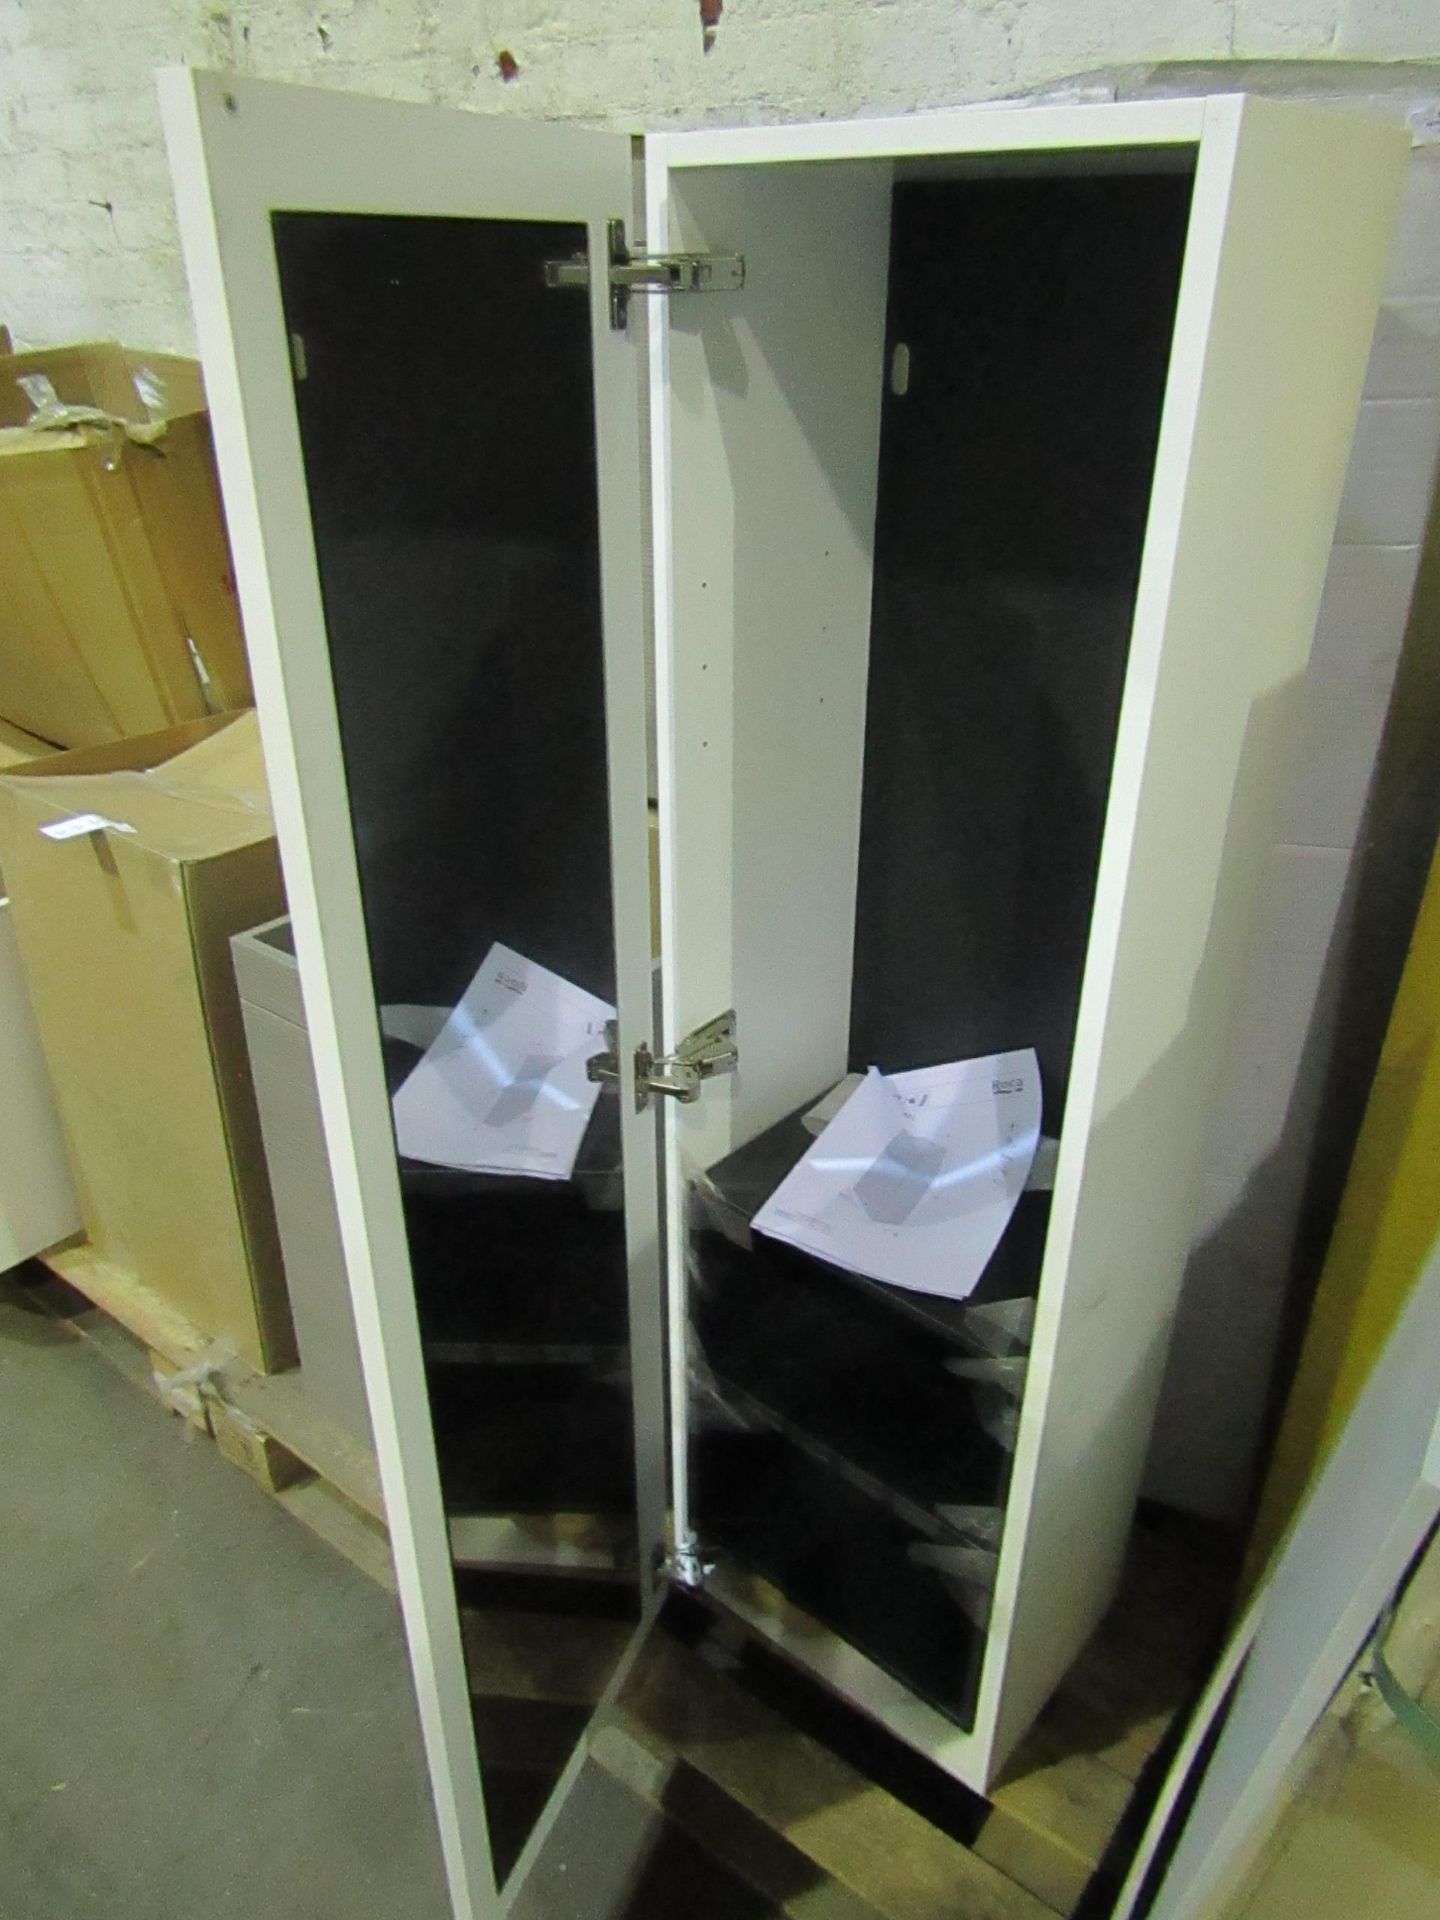 Roca - Beyond Column 1400mm Gloss White Unit With Built-In Mirror - Very Good Condition & Boxed.